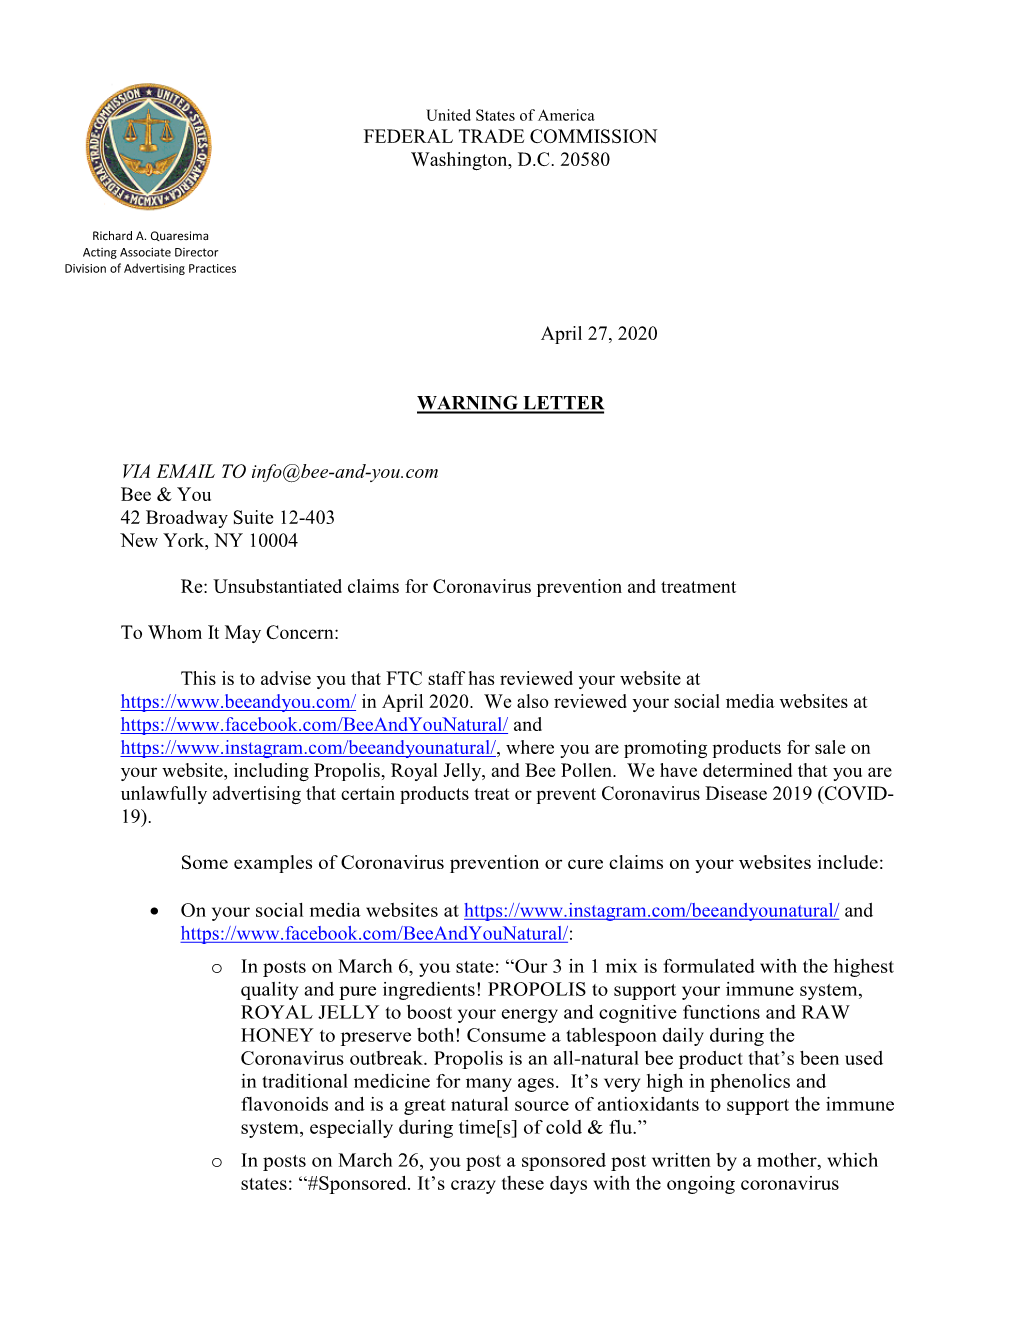 FEDERAL TRADE COMMISSION Washington, D.C. 20580 April 27, 2020 WARNING LETTER VIA EMAIL to Info@Bee-And-You.Com Bee & You 42